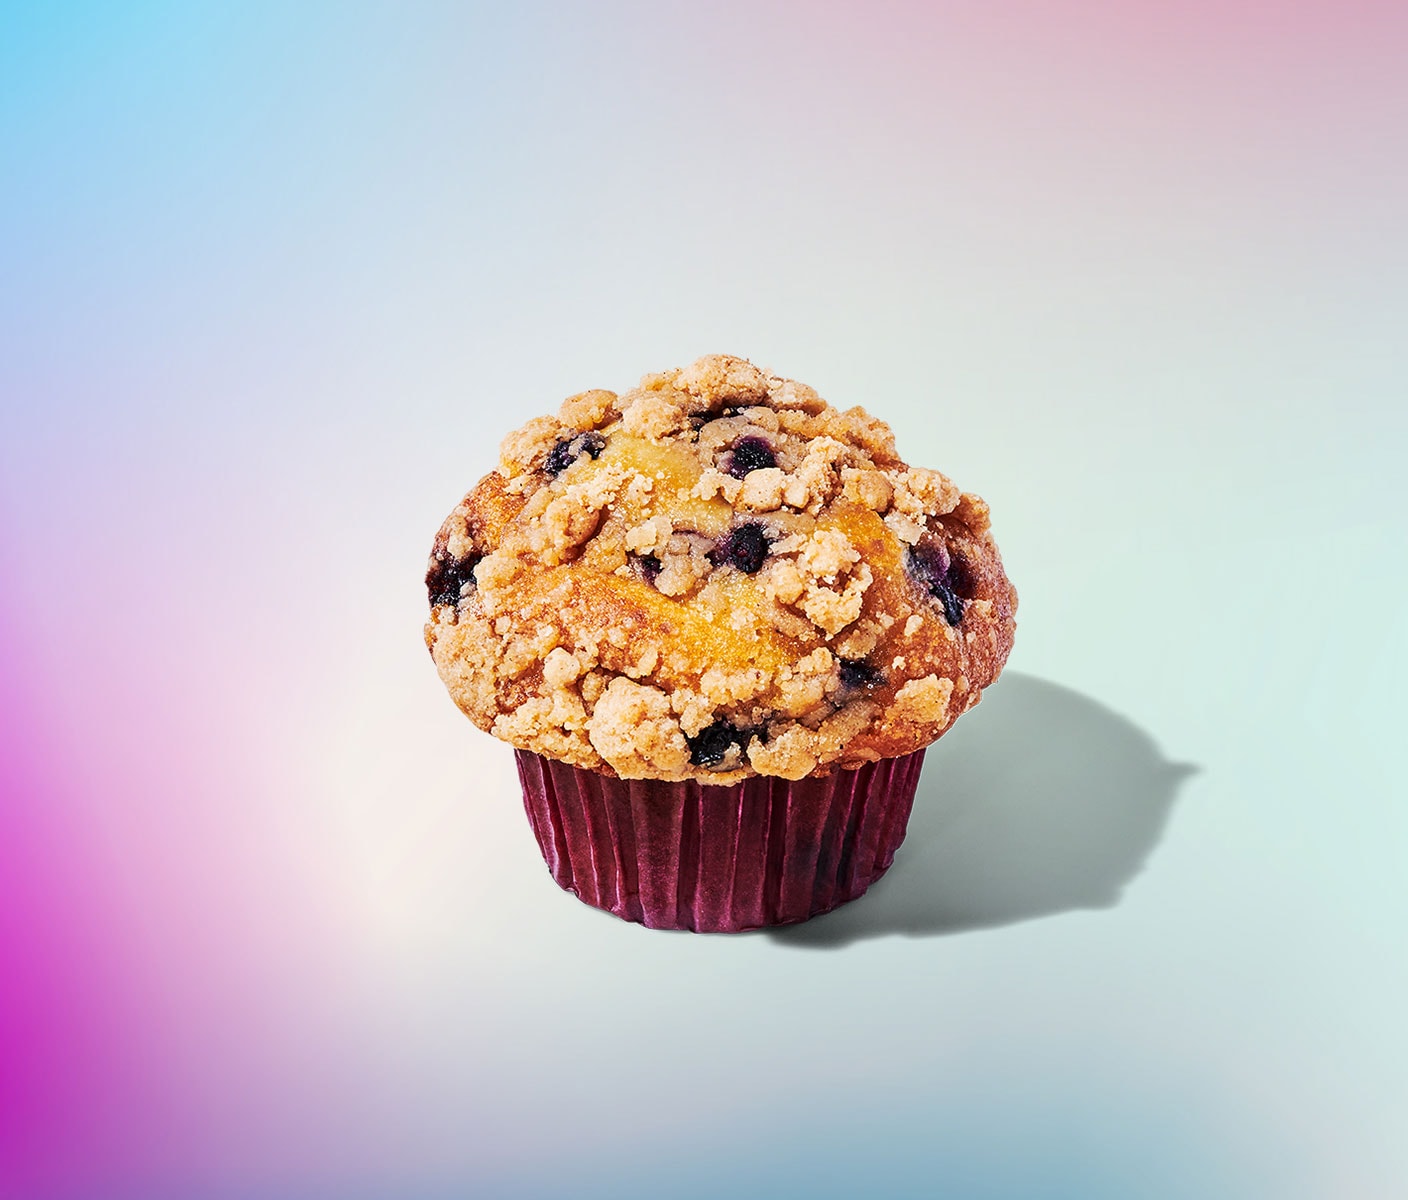 A golden brown muffin with blueberries and a crumbly topping.